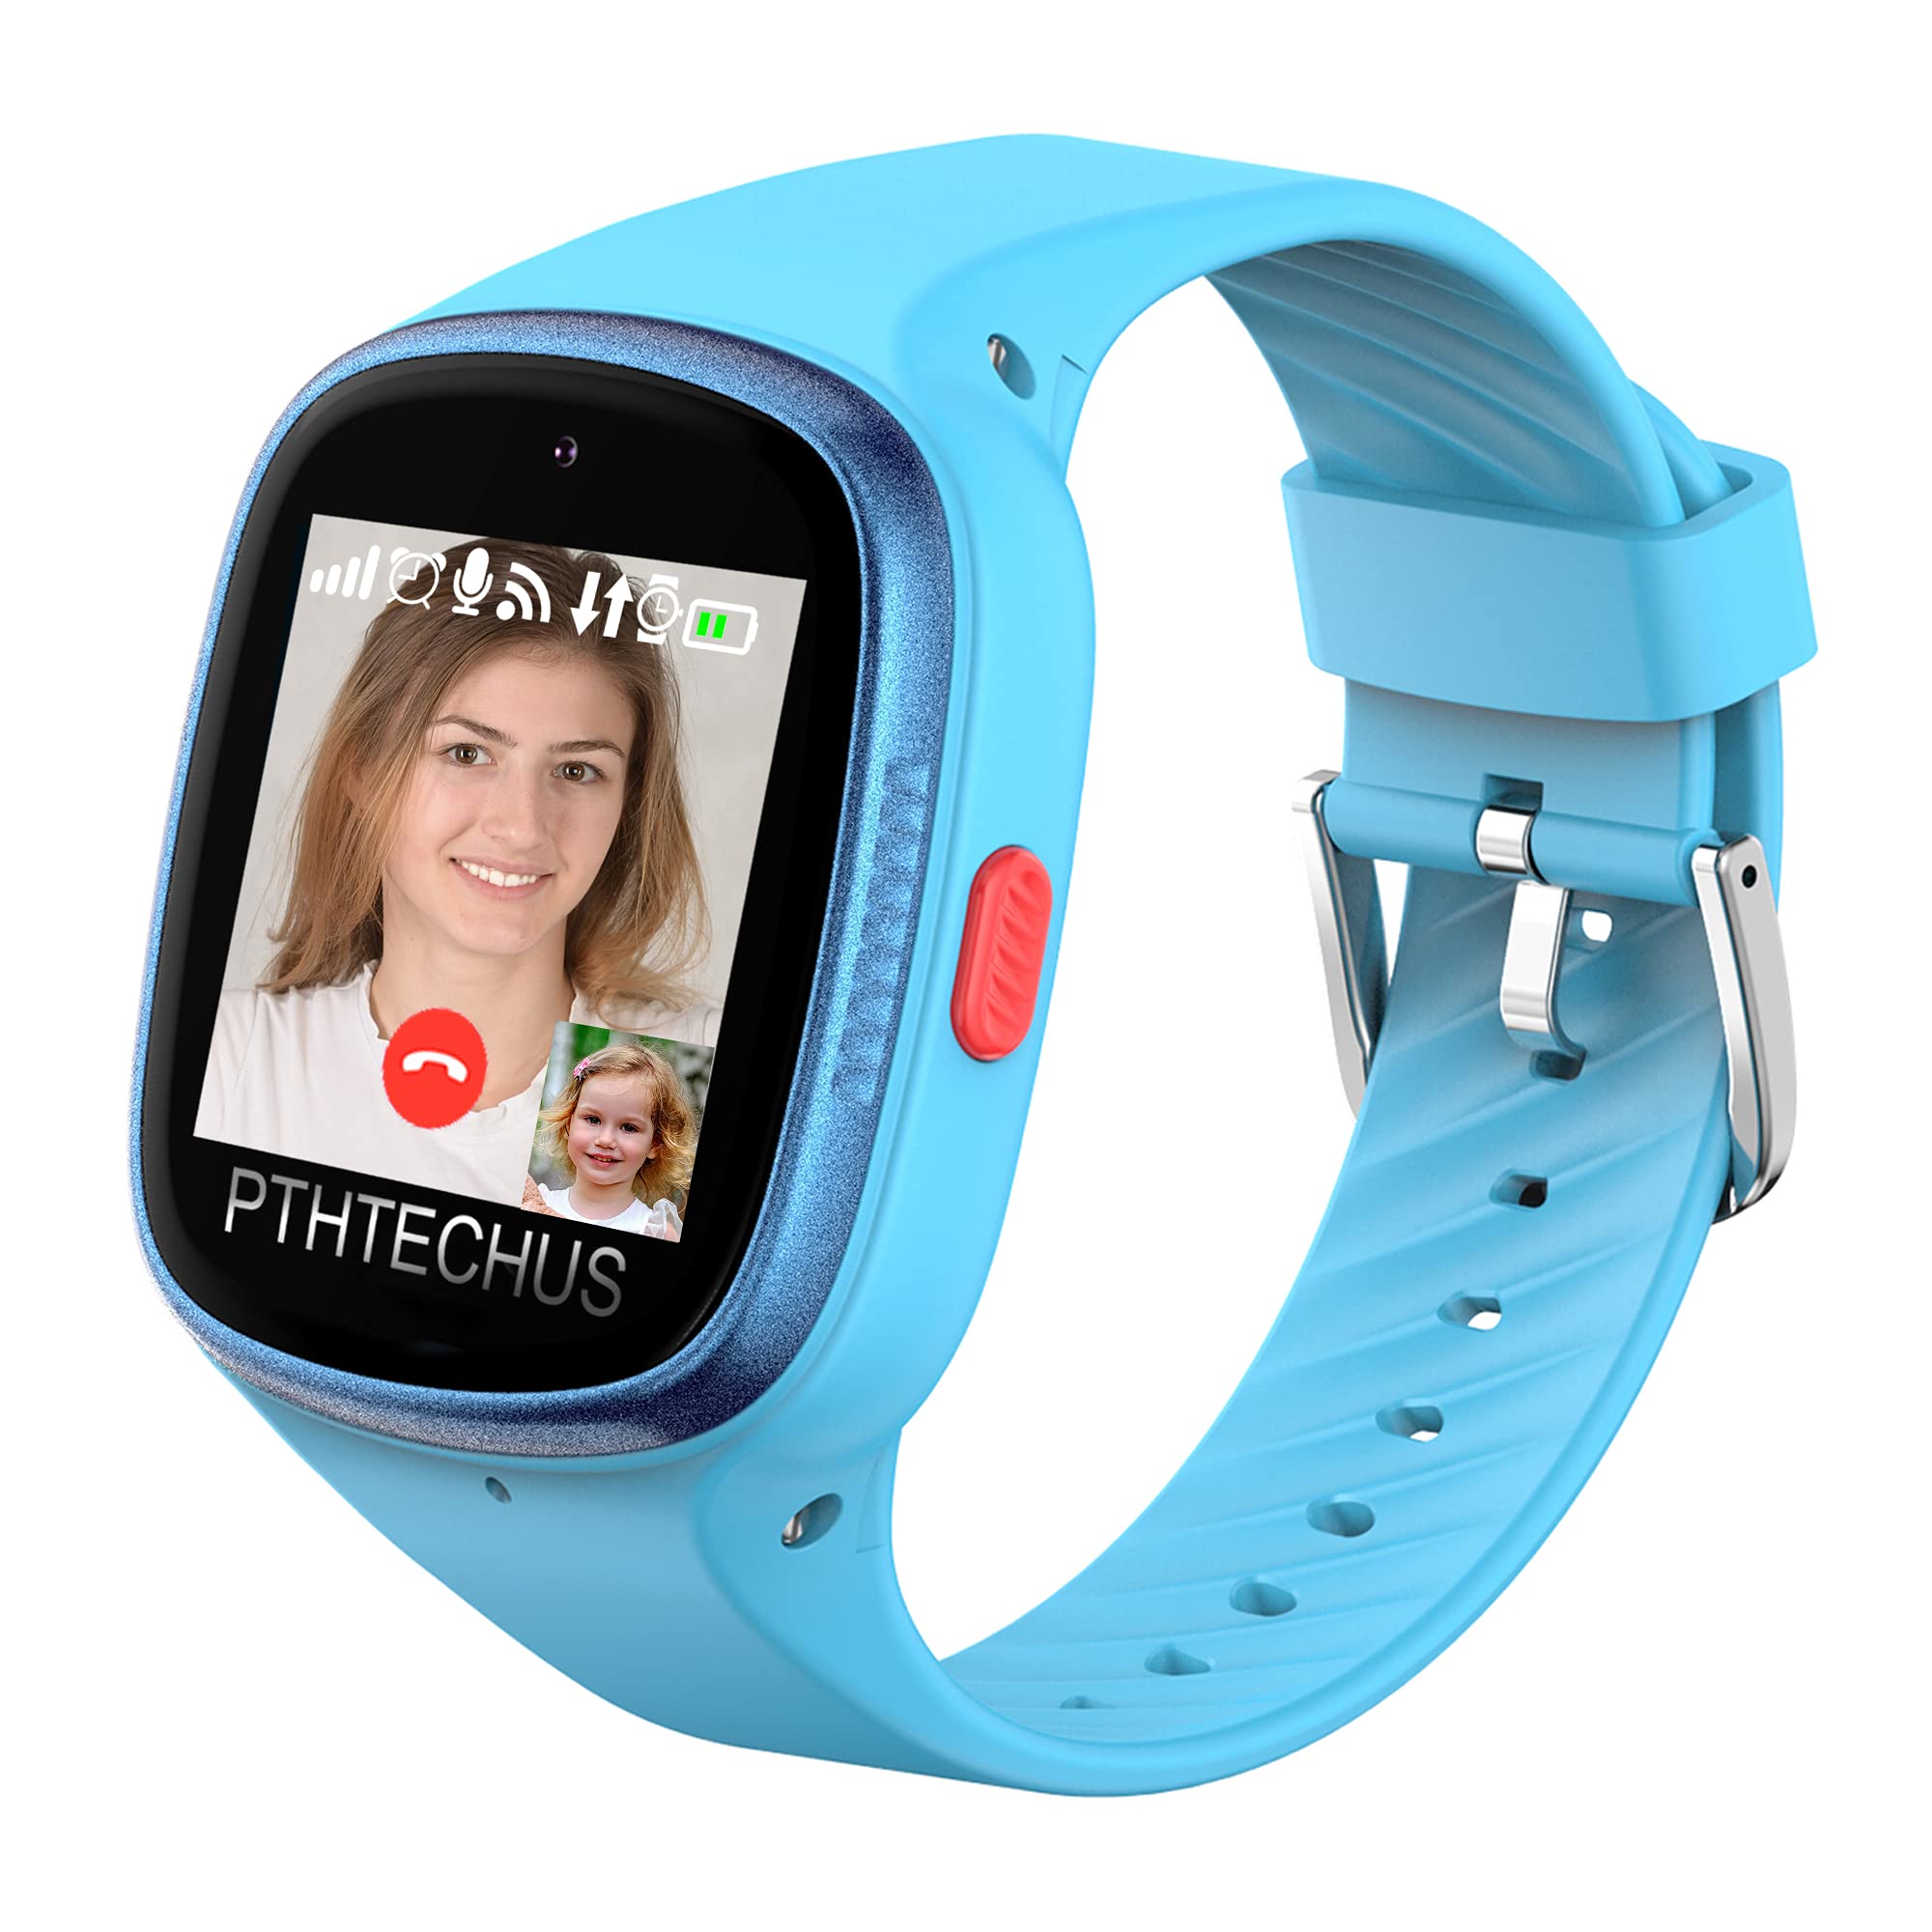 PTHTECHUS 4G Watch Phone for Children - Kids Smart Watch with WiFi, Dail, Voice Messages & Video Calls, GPS Location, Students School Mode, SOS Fun...